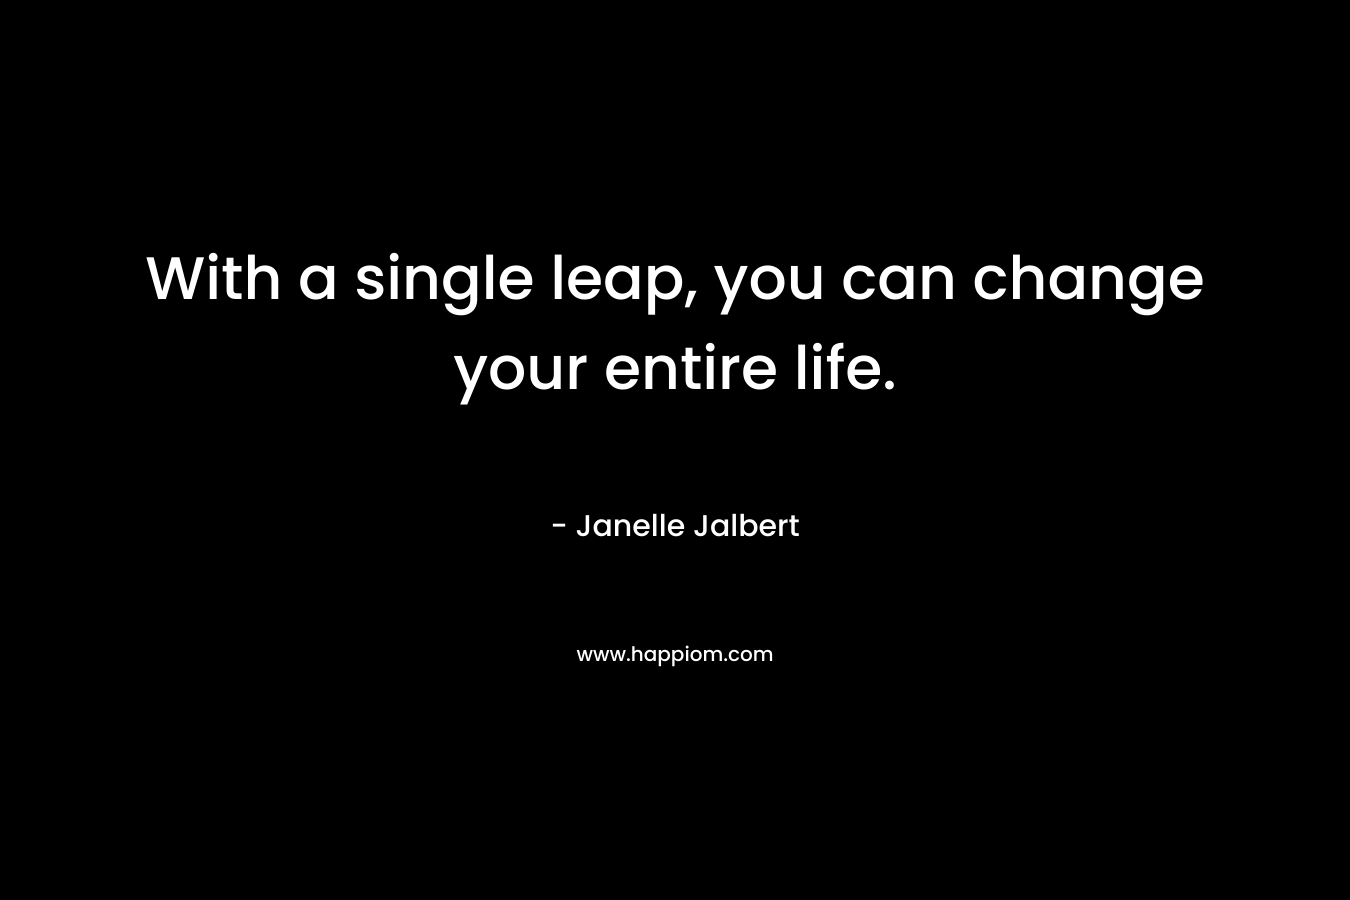 With a single leap, you can change your entire life. – Janelle Jalbert